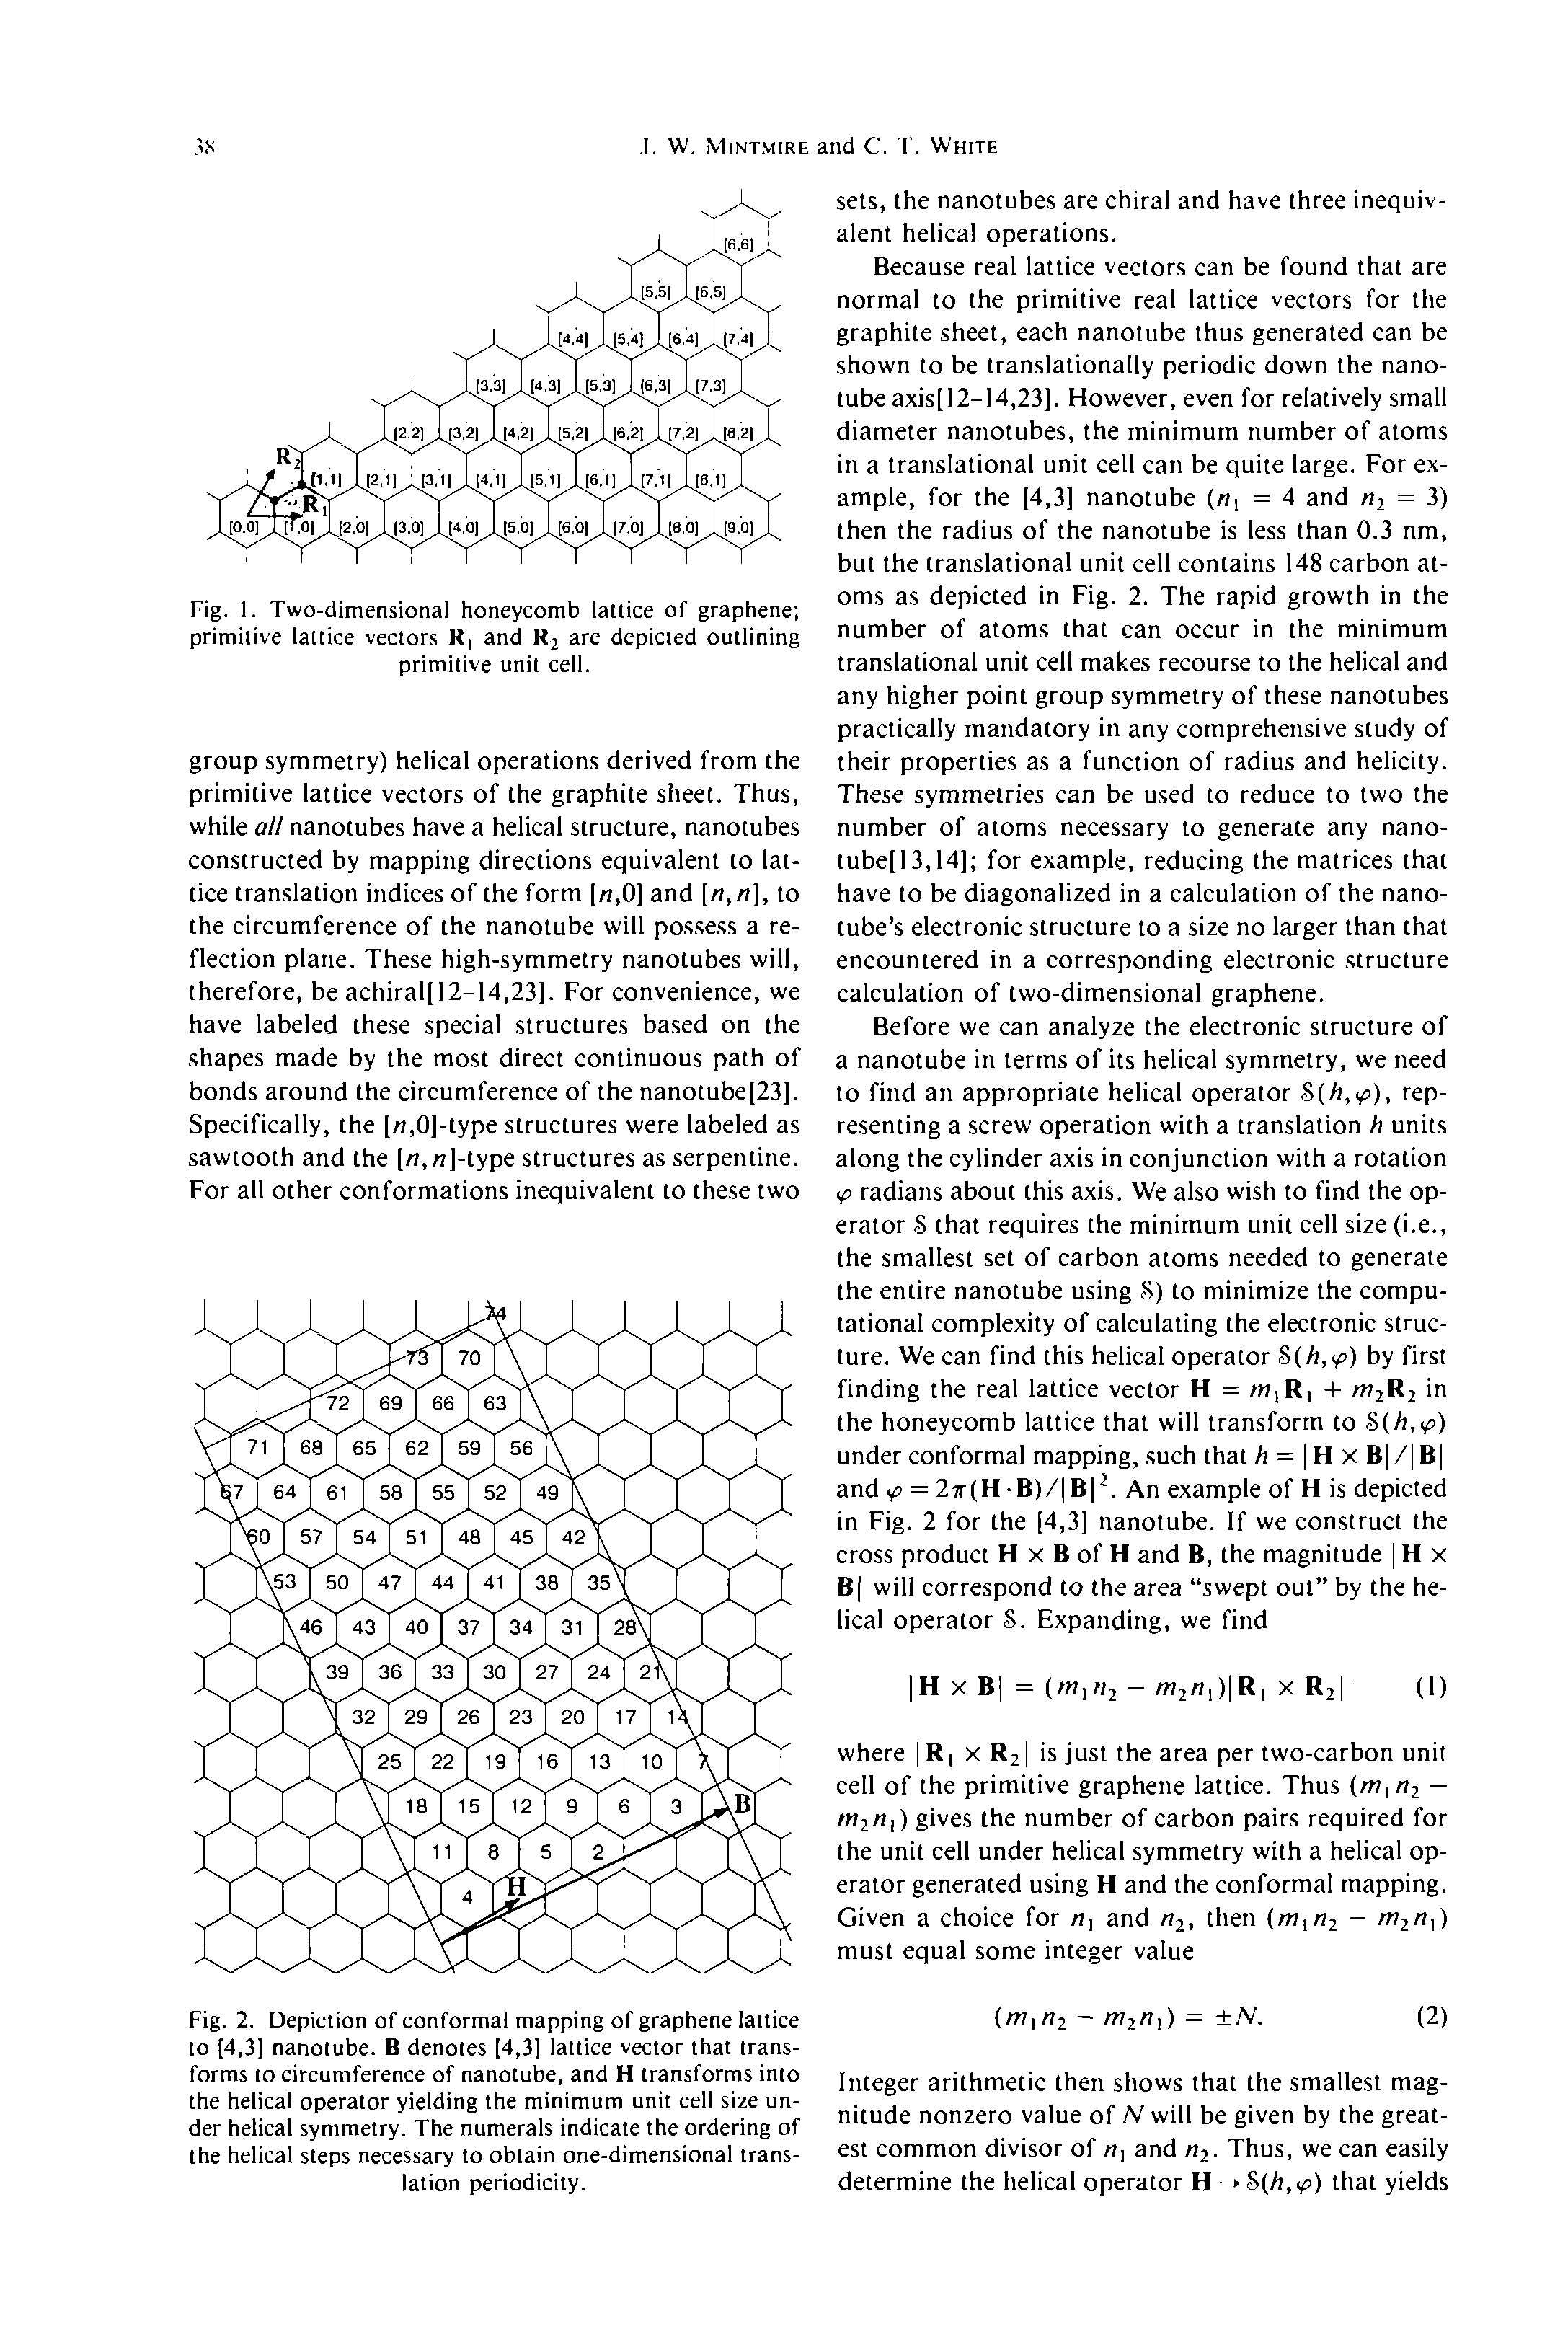 Fig. 2. Depiction of conformal mapping of graphene lattice to [4,3] nanotube. B denotes [4,3] lattice vector that transforms to circumference of nanotube, and H transforms into the helical operator yielding the minimum unit cell size under helical symmetry. The numerals indicate the ordering of the helical steps necessary to obtain one-dimensional translation periodicity.